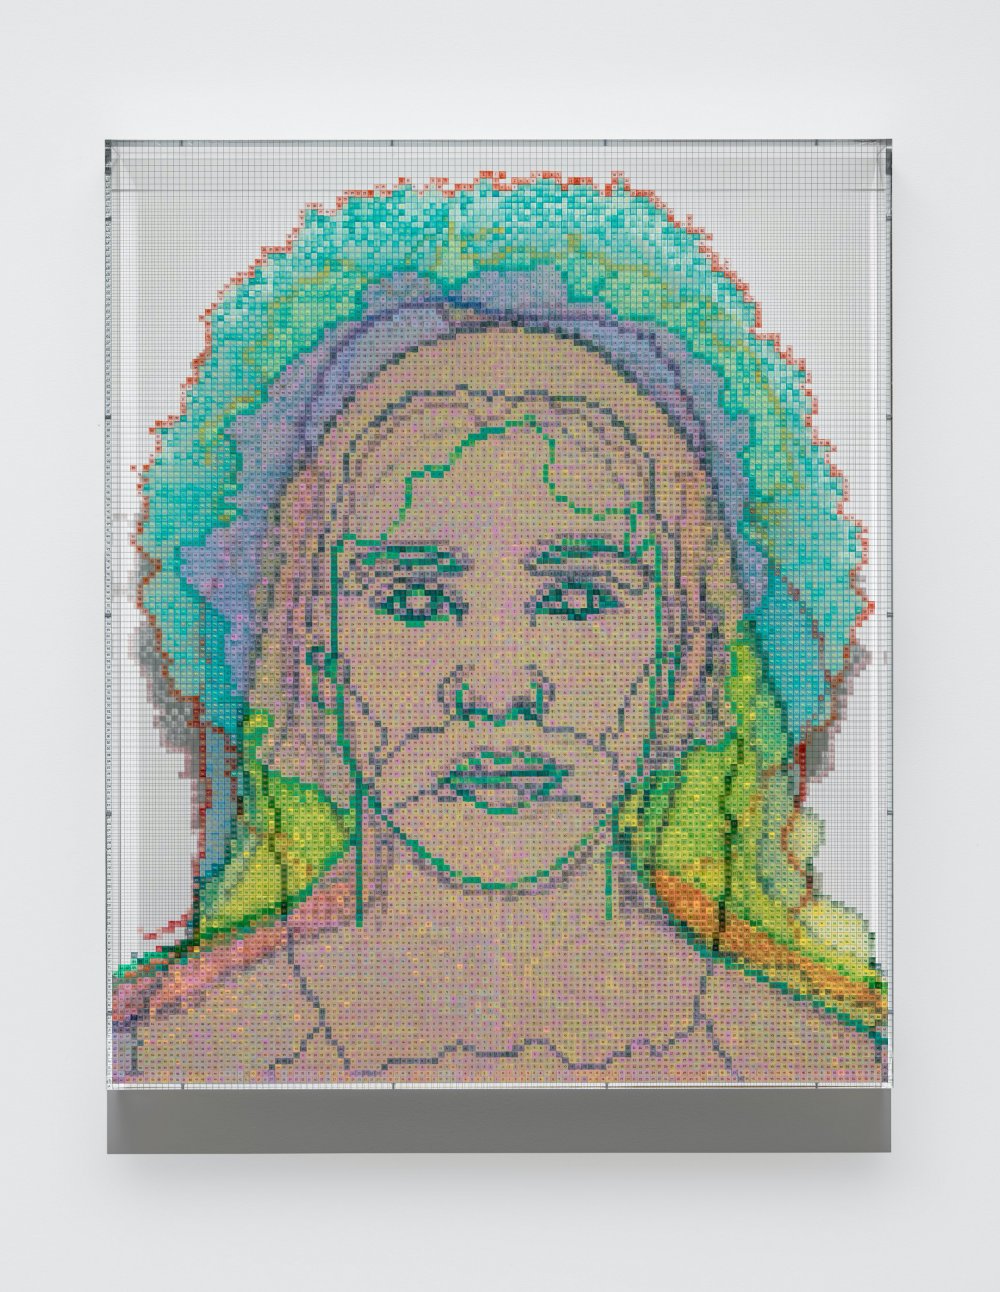 Charles Gaines, Numbers and Faces: Multi-Racial/Ethnic Combinations Series 1: Face #13, Ellen Yoshi Tani (Japanese/Irish/Danish/English), 2020